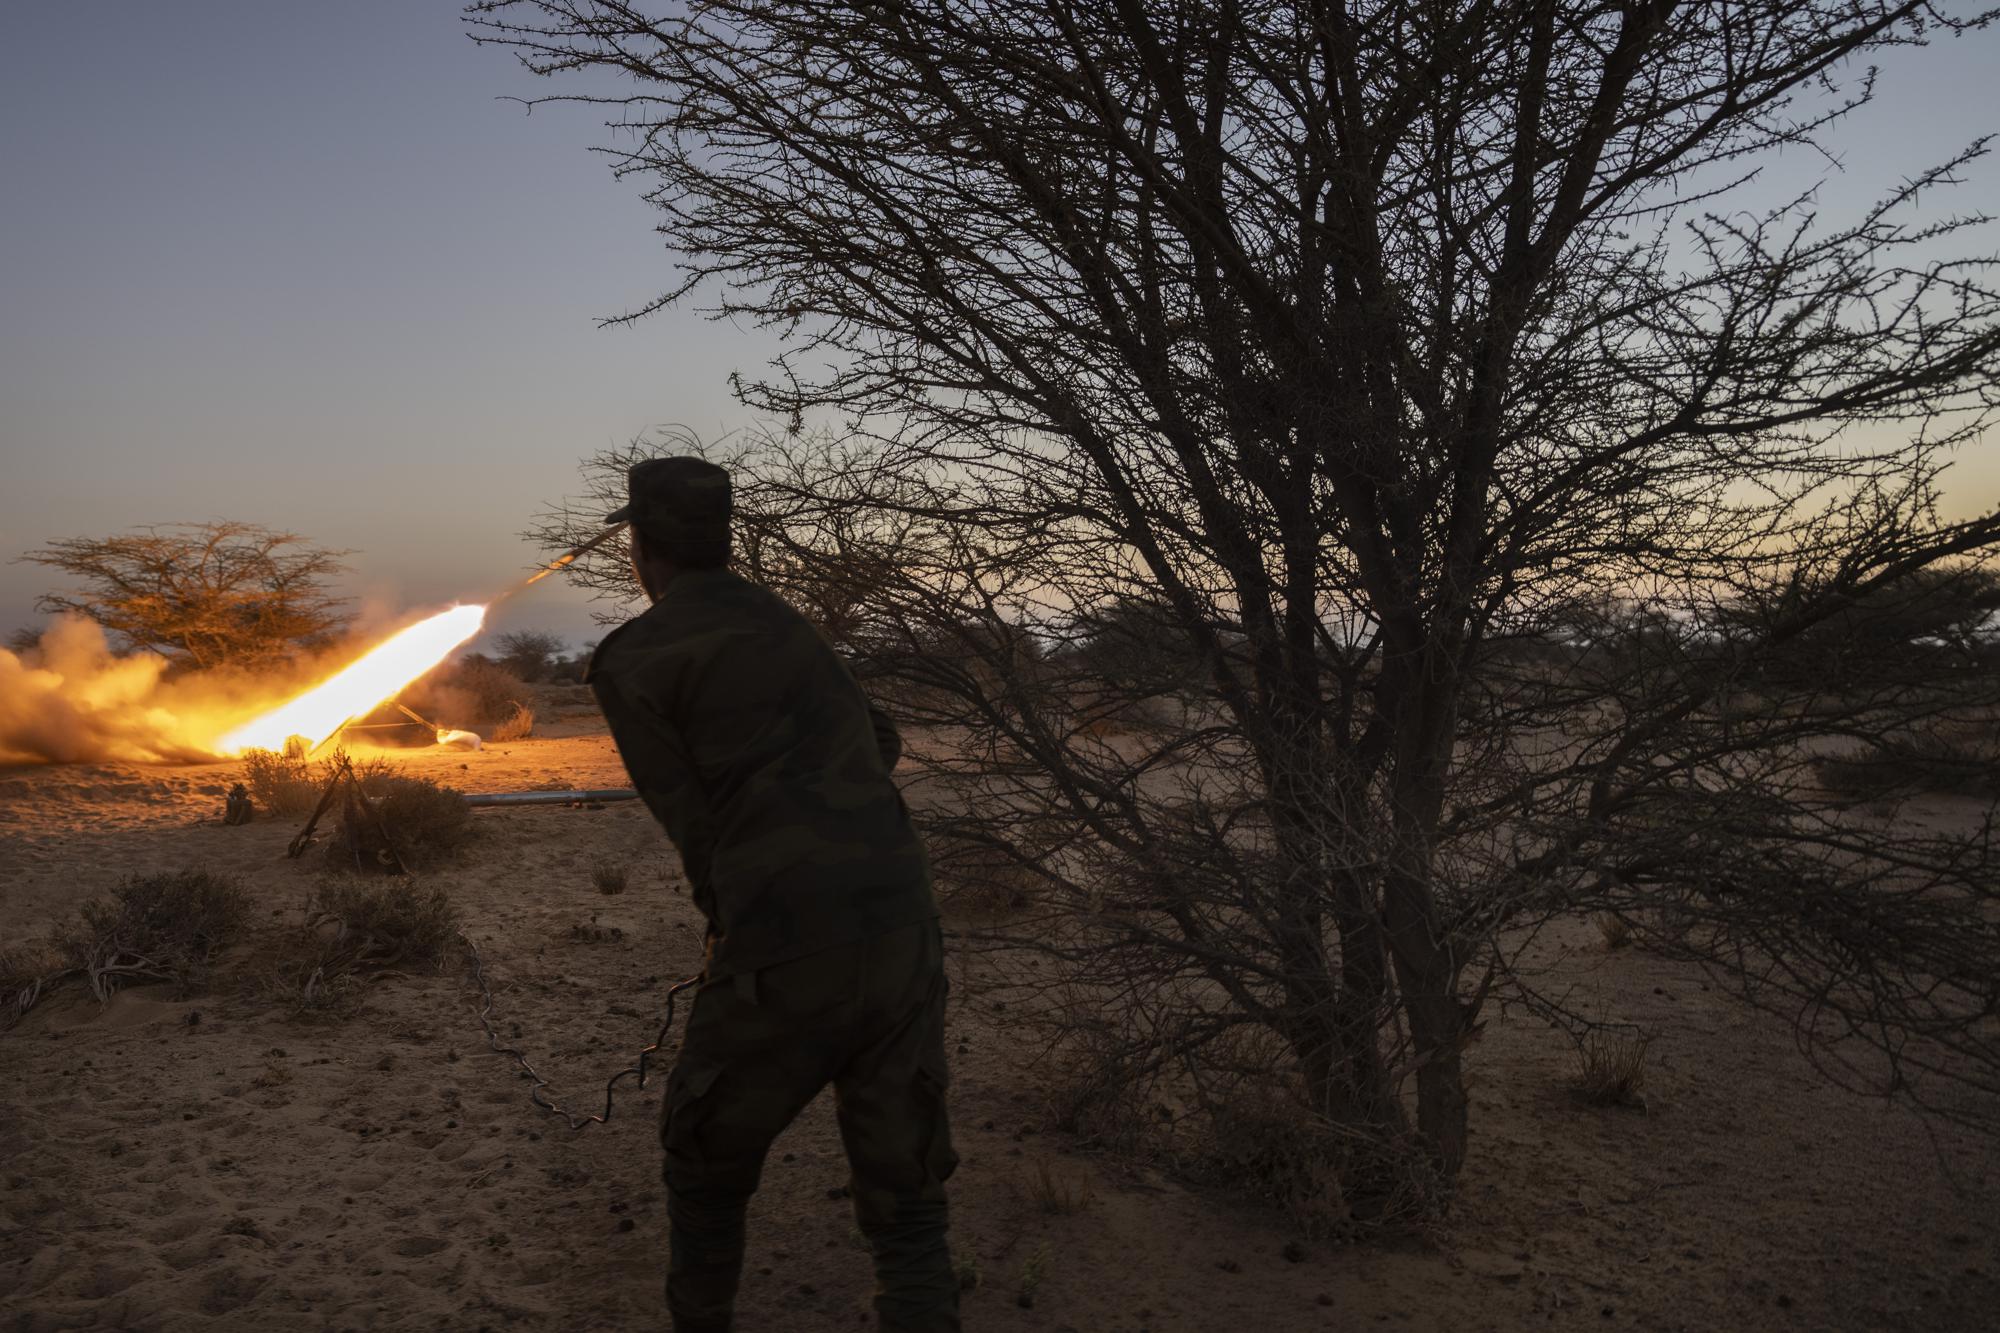 A soldier from the Polisario Front fires a rocket towards Morocco, near Mehaires, Western Sahara, Thursday, Oct. 14, 2021. After 30 years of ceasefire, the Polisario Front has taken up arms again in its quest for an independent Western Sahara. The flaring up of the conflict is fueled by frustration among new generations of Sahrawi refugees who believe that the wait for a referendum on self-determination, as promised by the United Nations, has only played on Morocco's benefit while their lives languished in the unforgiving desert camps. (AP Photo/Bernat Armangue)